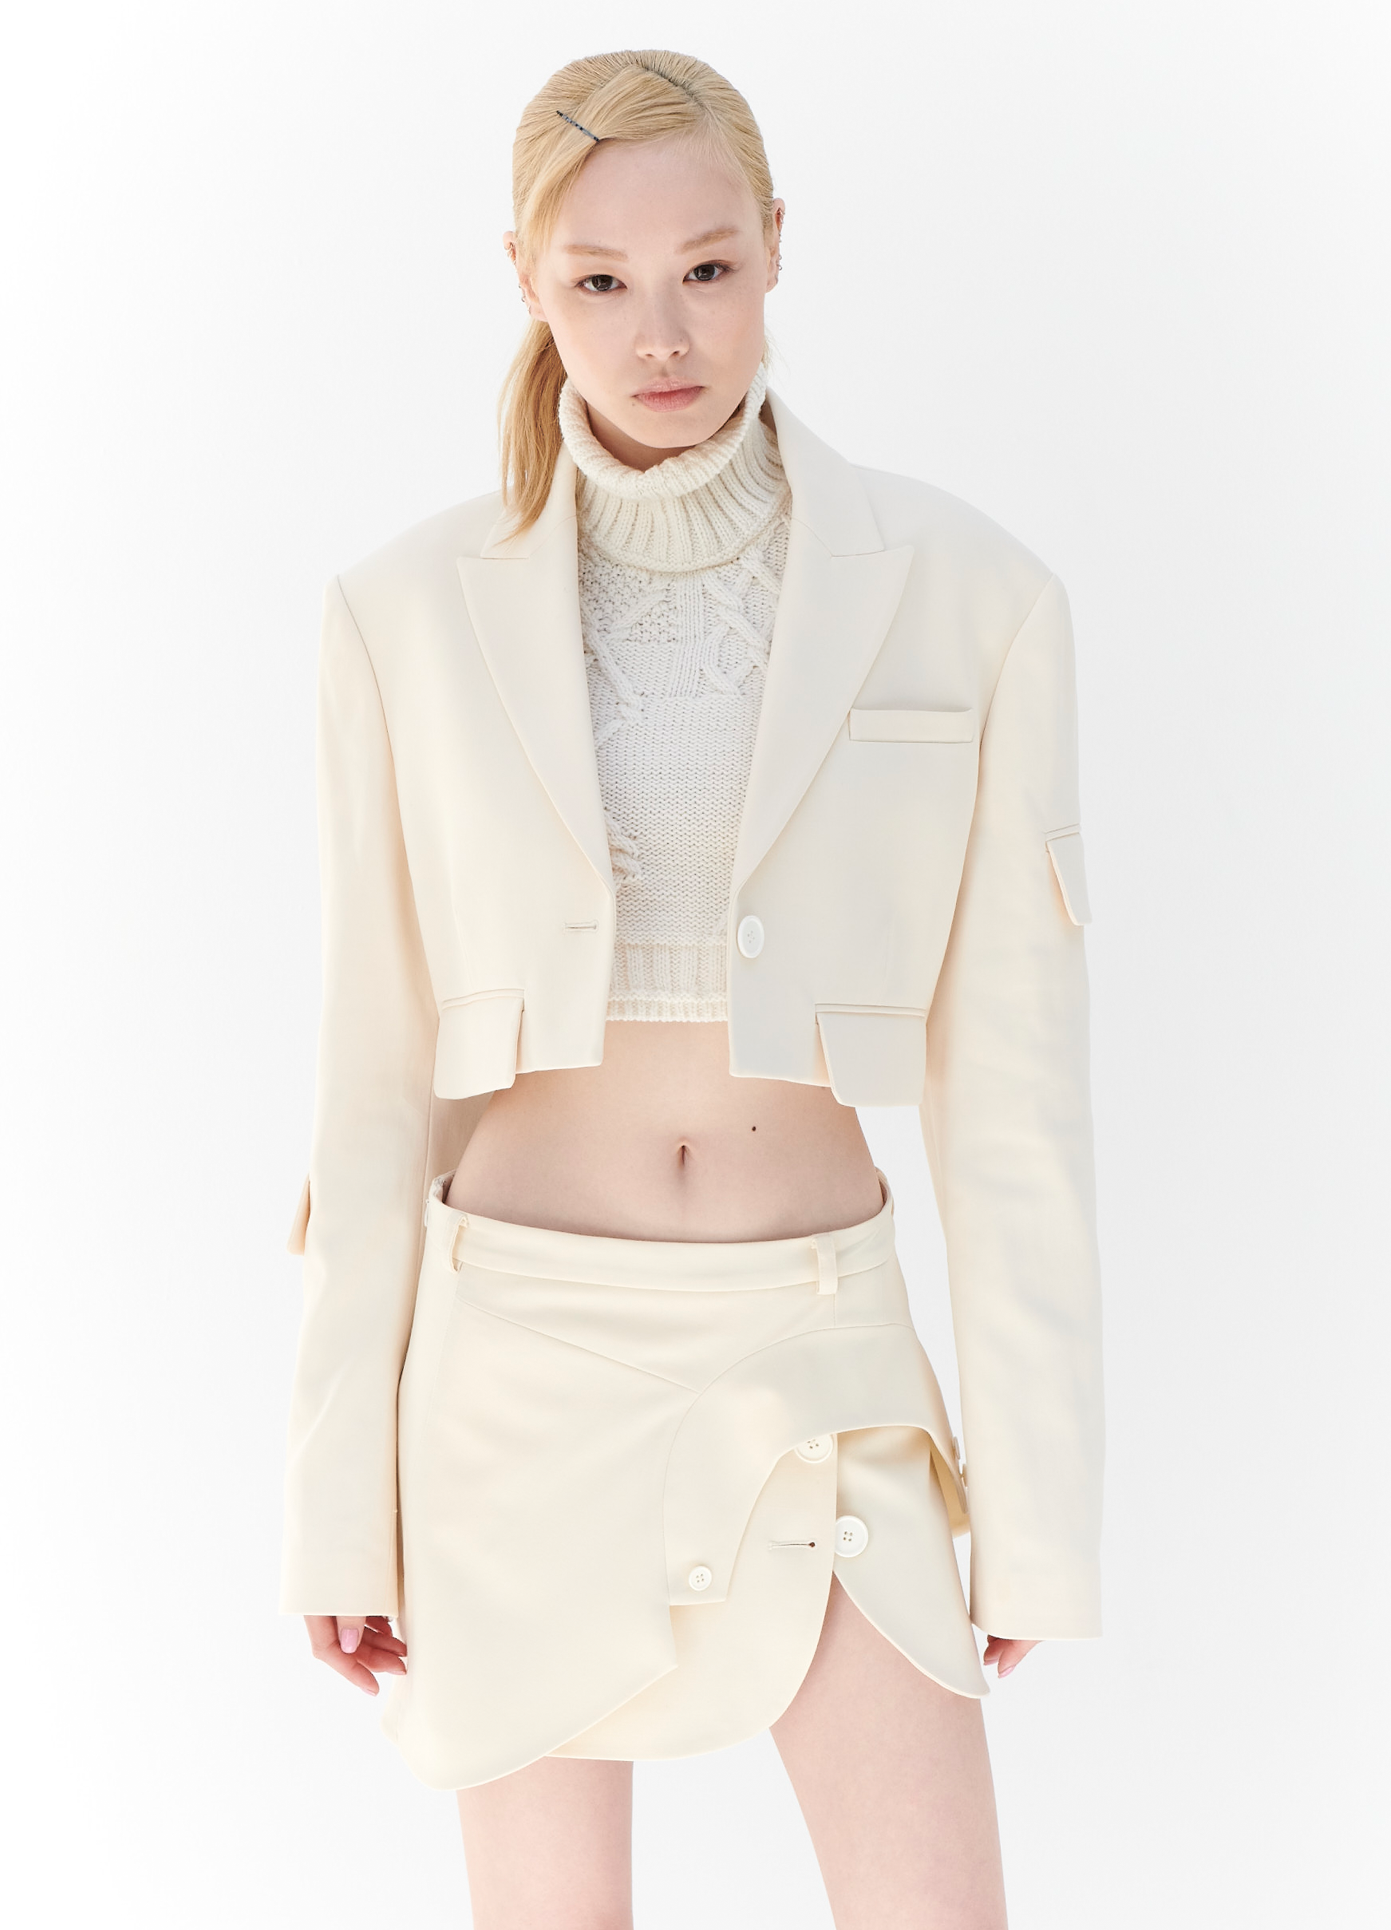 MONSE Cropped Jacket in Ivory on model full front view